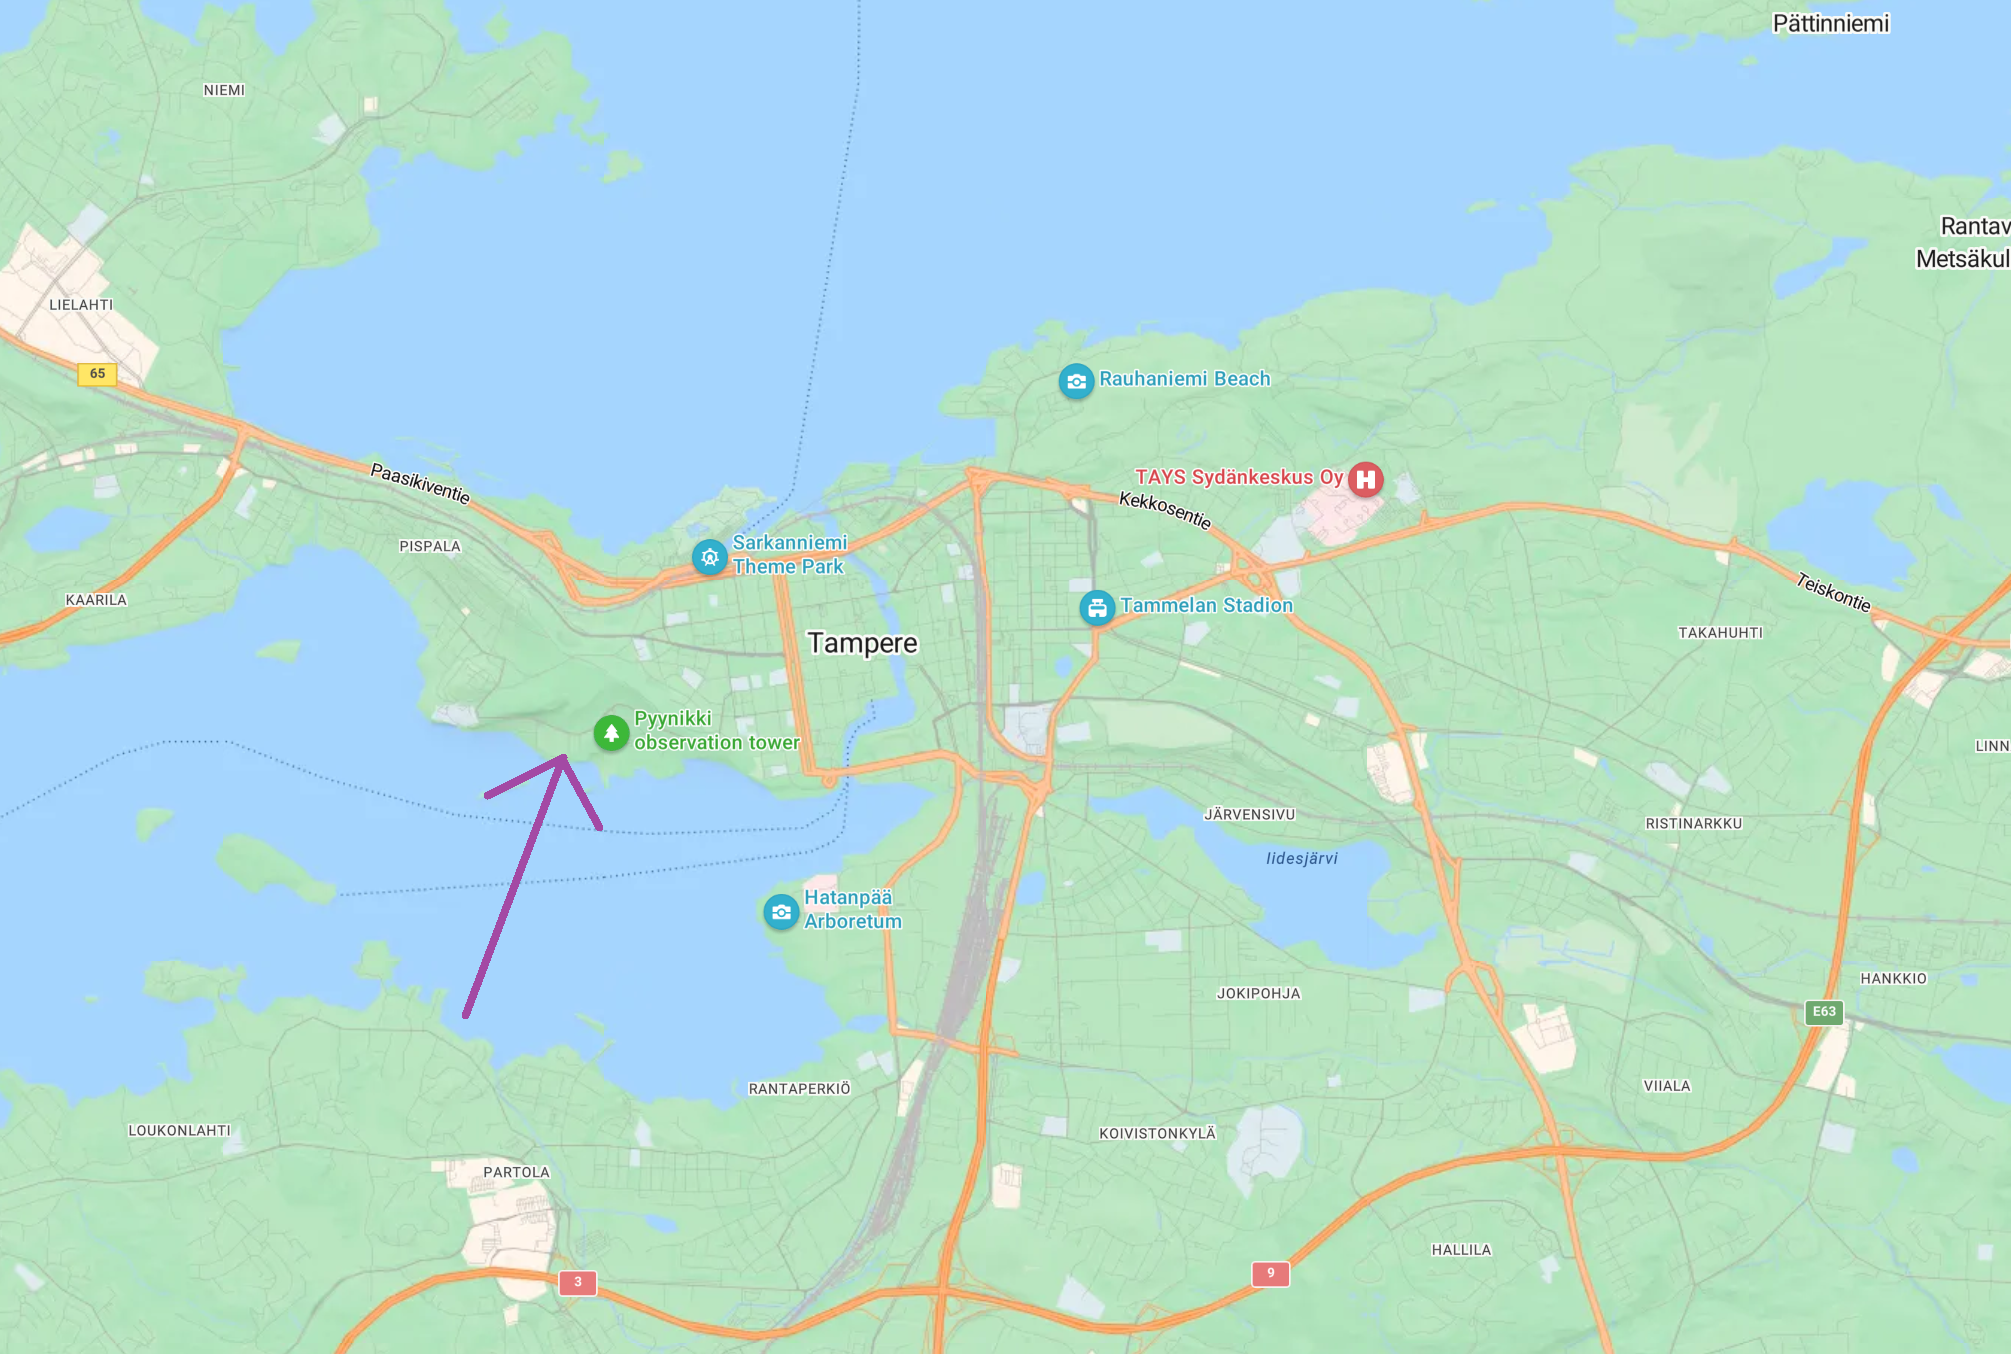 Unity's offices are located at the point indicated by the purple arrow on the shore of lake Pyhäjärvi.